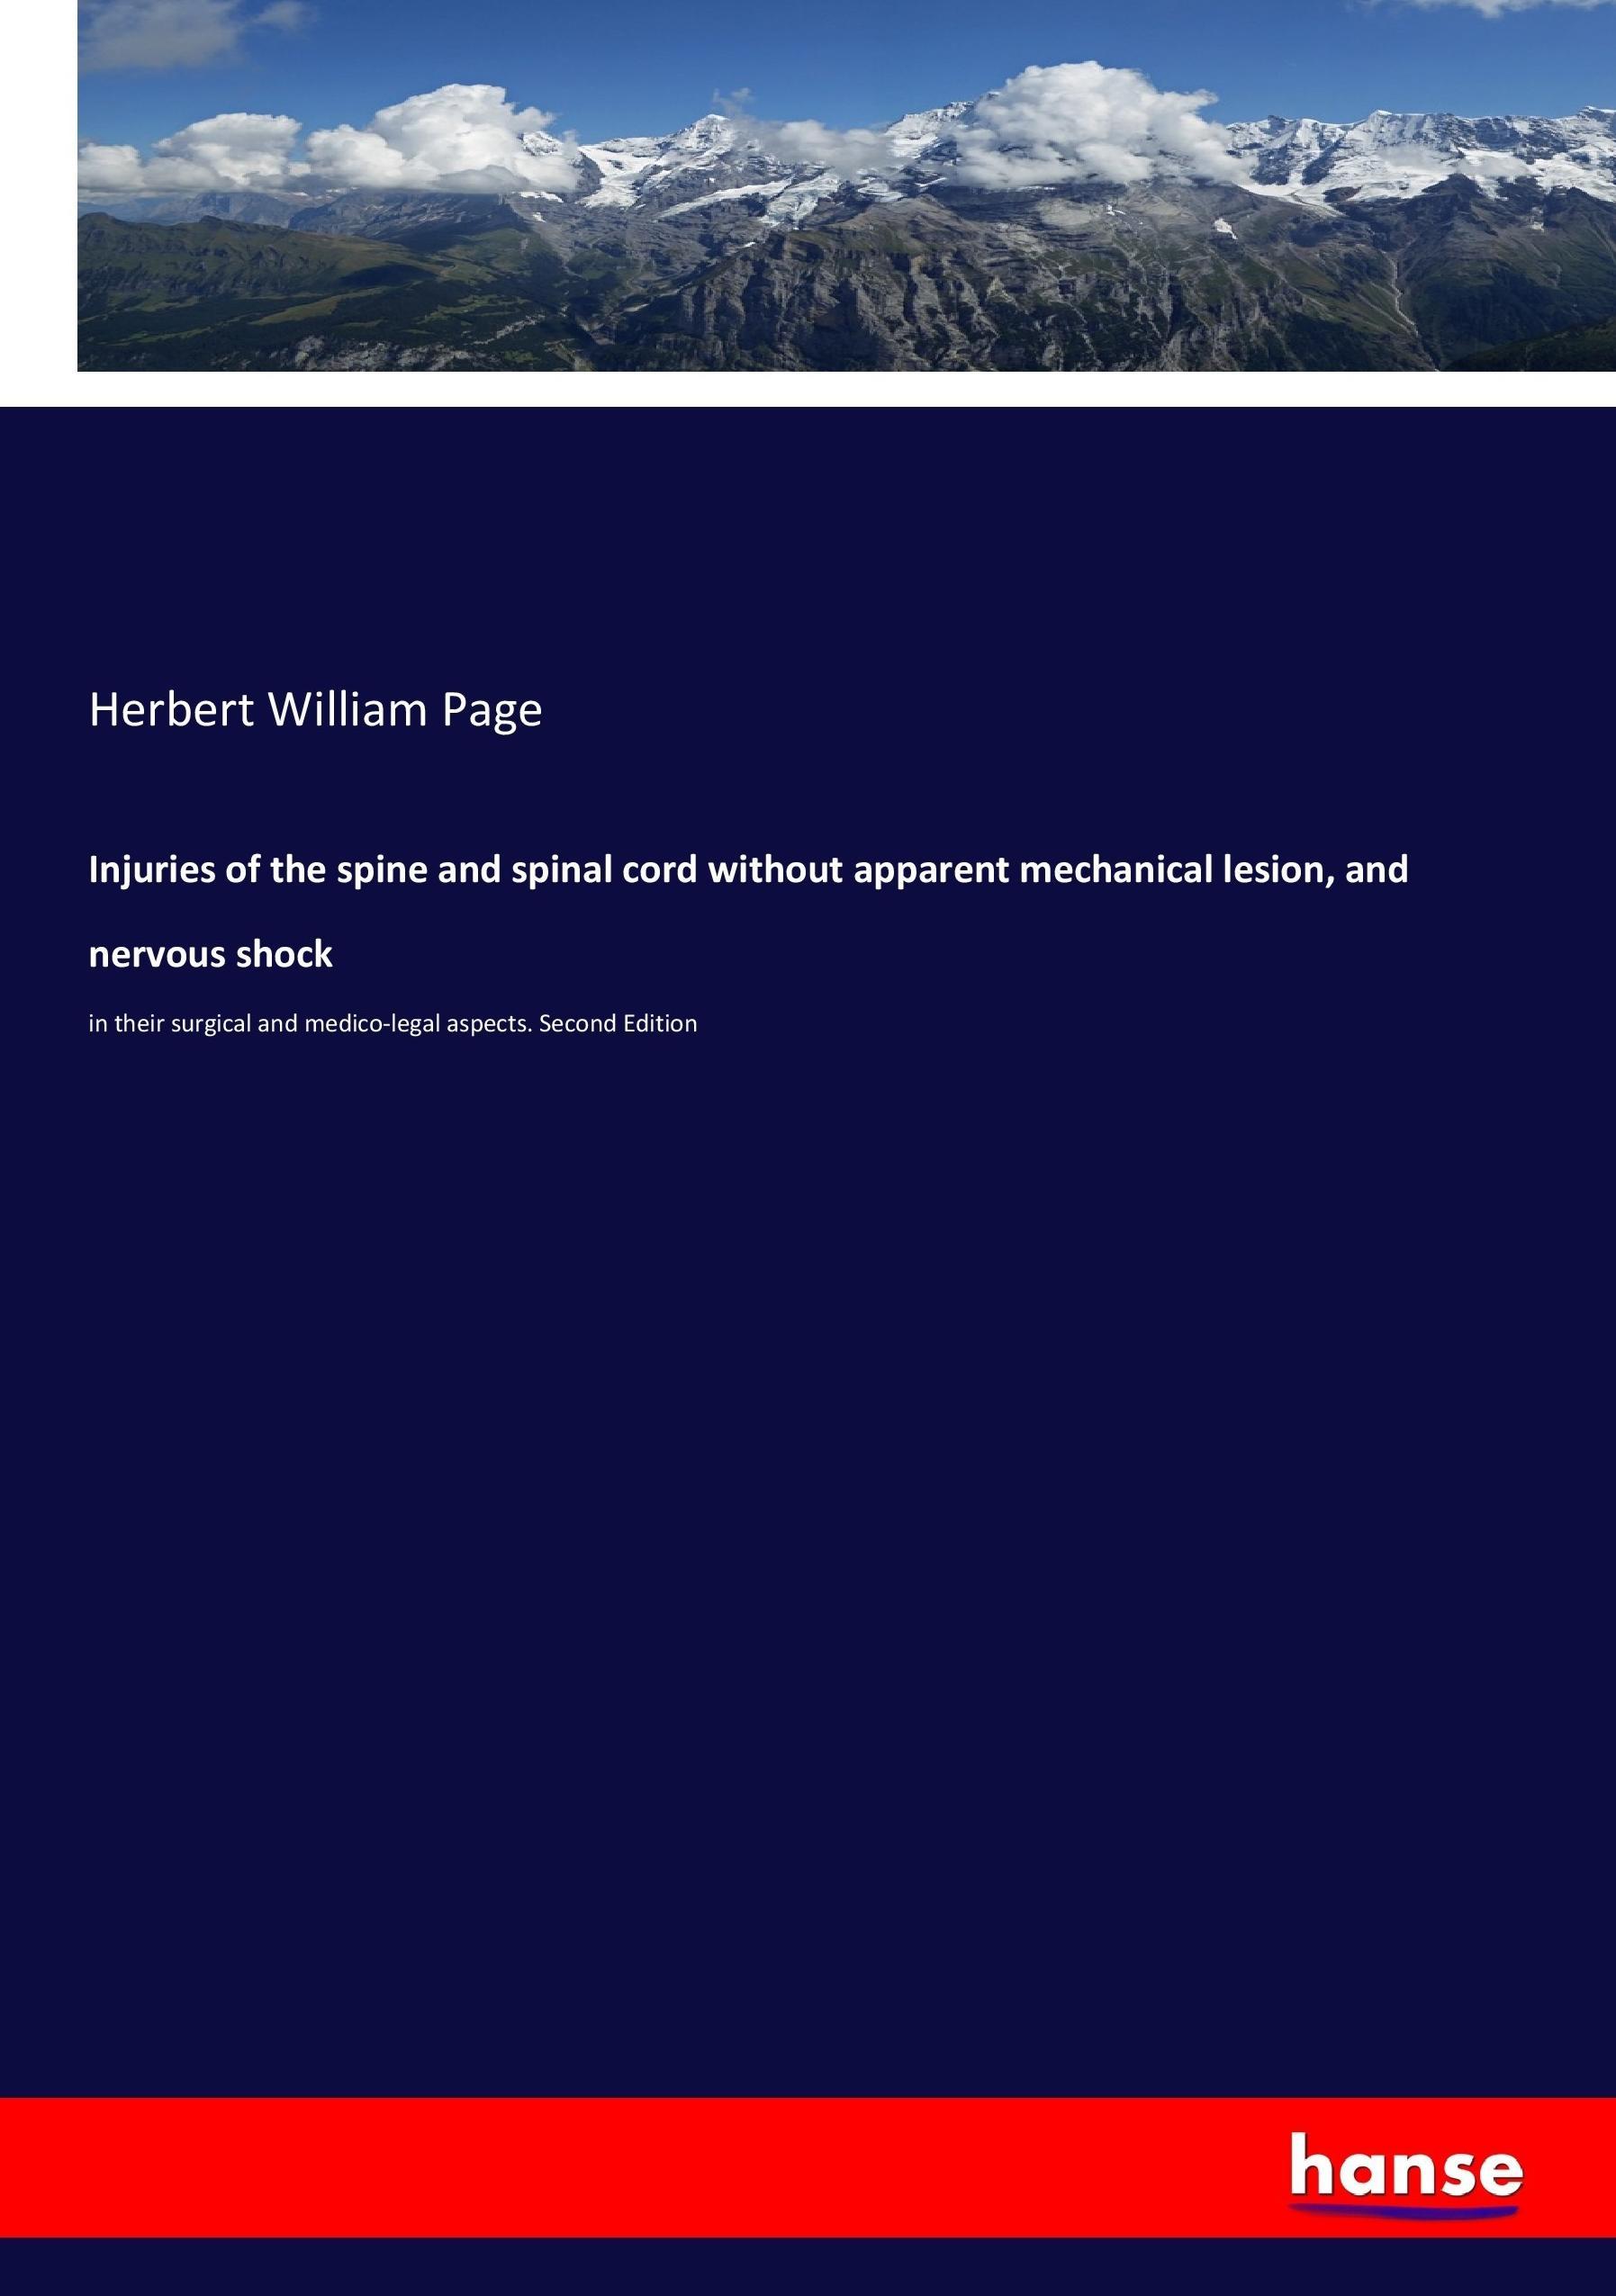 Injuries of the spine and spinal cord without apparent mechanical lesion, and nervous shock | in their surgical and medico-legal aspects. Second Edition | Herbert William Page | Taschenbuch | 416 S. - Page, Herbert William